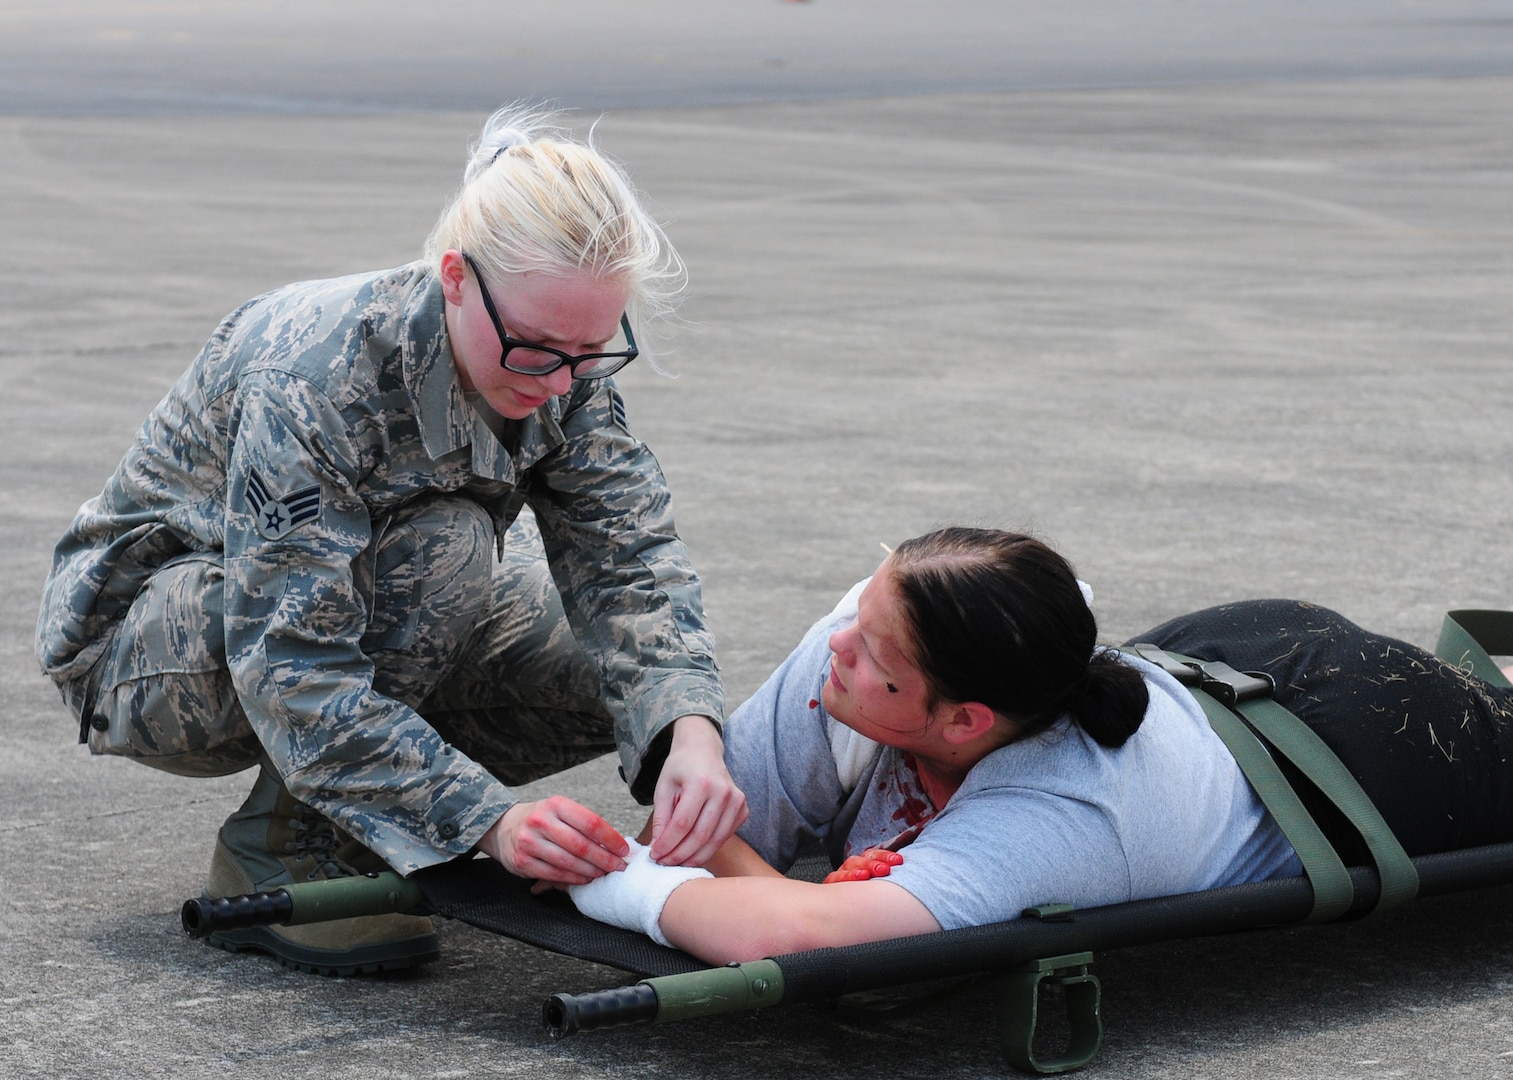 U.S. Air Force Senior Airman Megan Dolash, a medical technician with the 118th medical group, Tennessee Air National Guard tends to a cadet from Volunteer Challenge Academy at a mass casualty event during the Shaken Fury exercise at Smyrna Airport, Smyrna, Tennessee, June 1, 2019. Shaken Fury is a Federal Emergency Management Agency led exercise simulating a catastrophic earthquake along the New Madrid Seizmic Zone (NMSZ) near Memphis, Tennessee. The purpose of the exercise is to examine and improve the community's response to a "no-notice" earthquake, recognize shortfalls in resources, and develop a coordinated recovery plan. (U.S. Air National Guard photo by Master Sgt. Jeremy Cornelius/RELEASED)